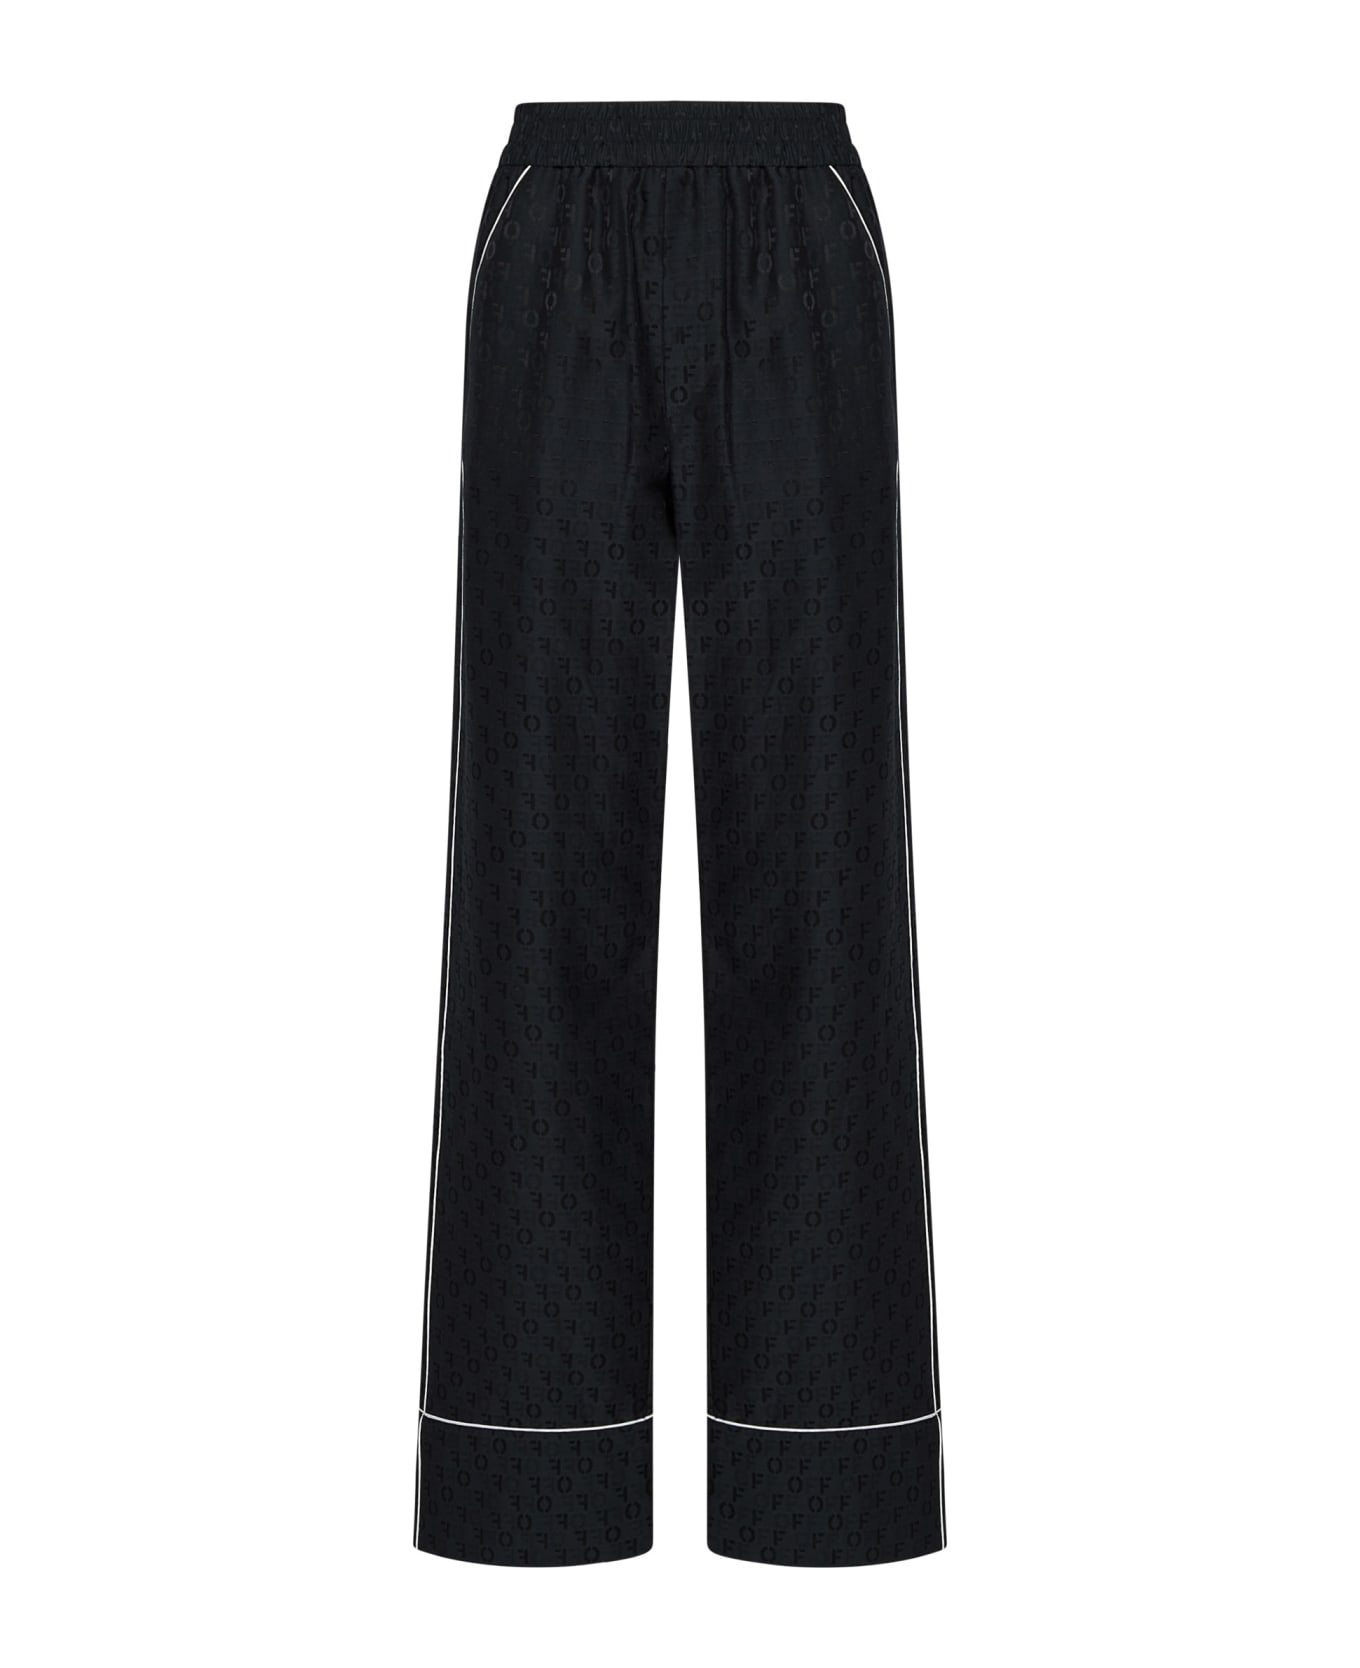 Off-White Silk Blend Trousers - black ボトムス